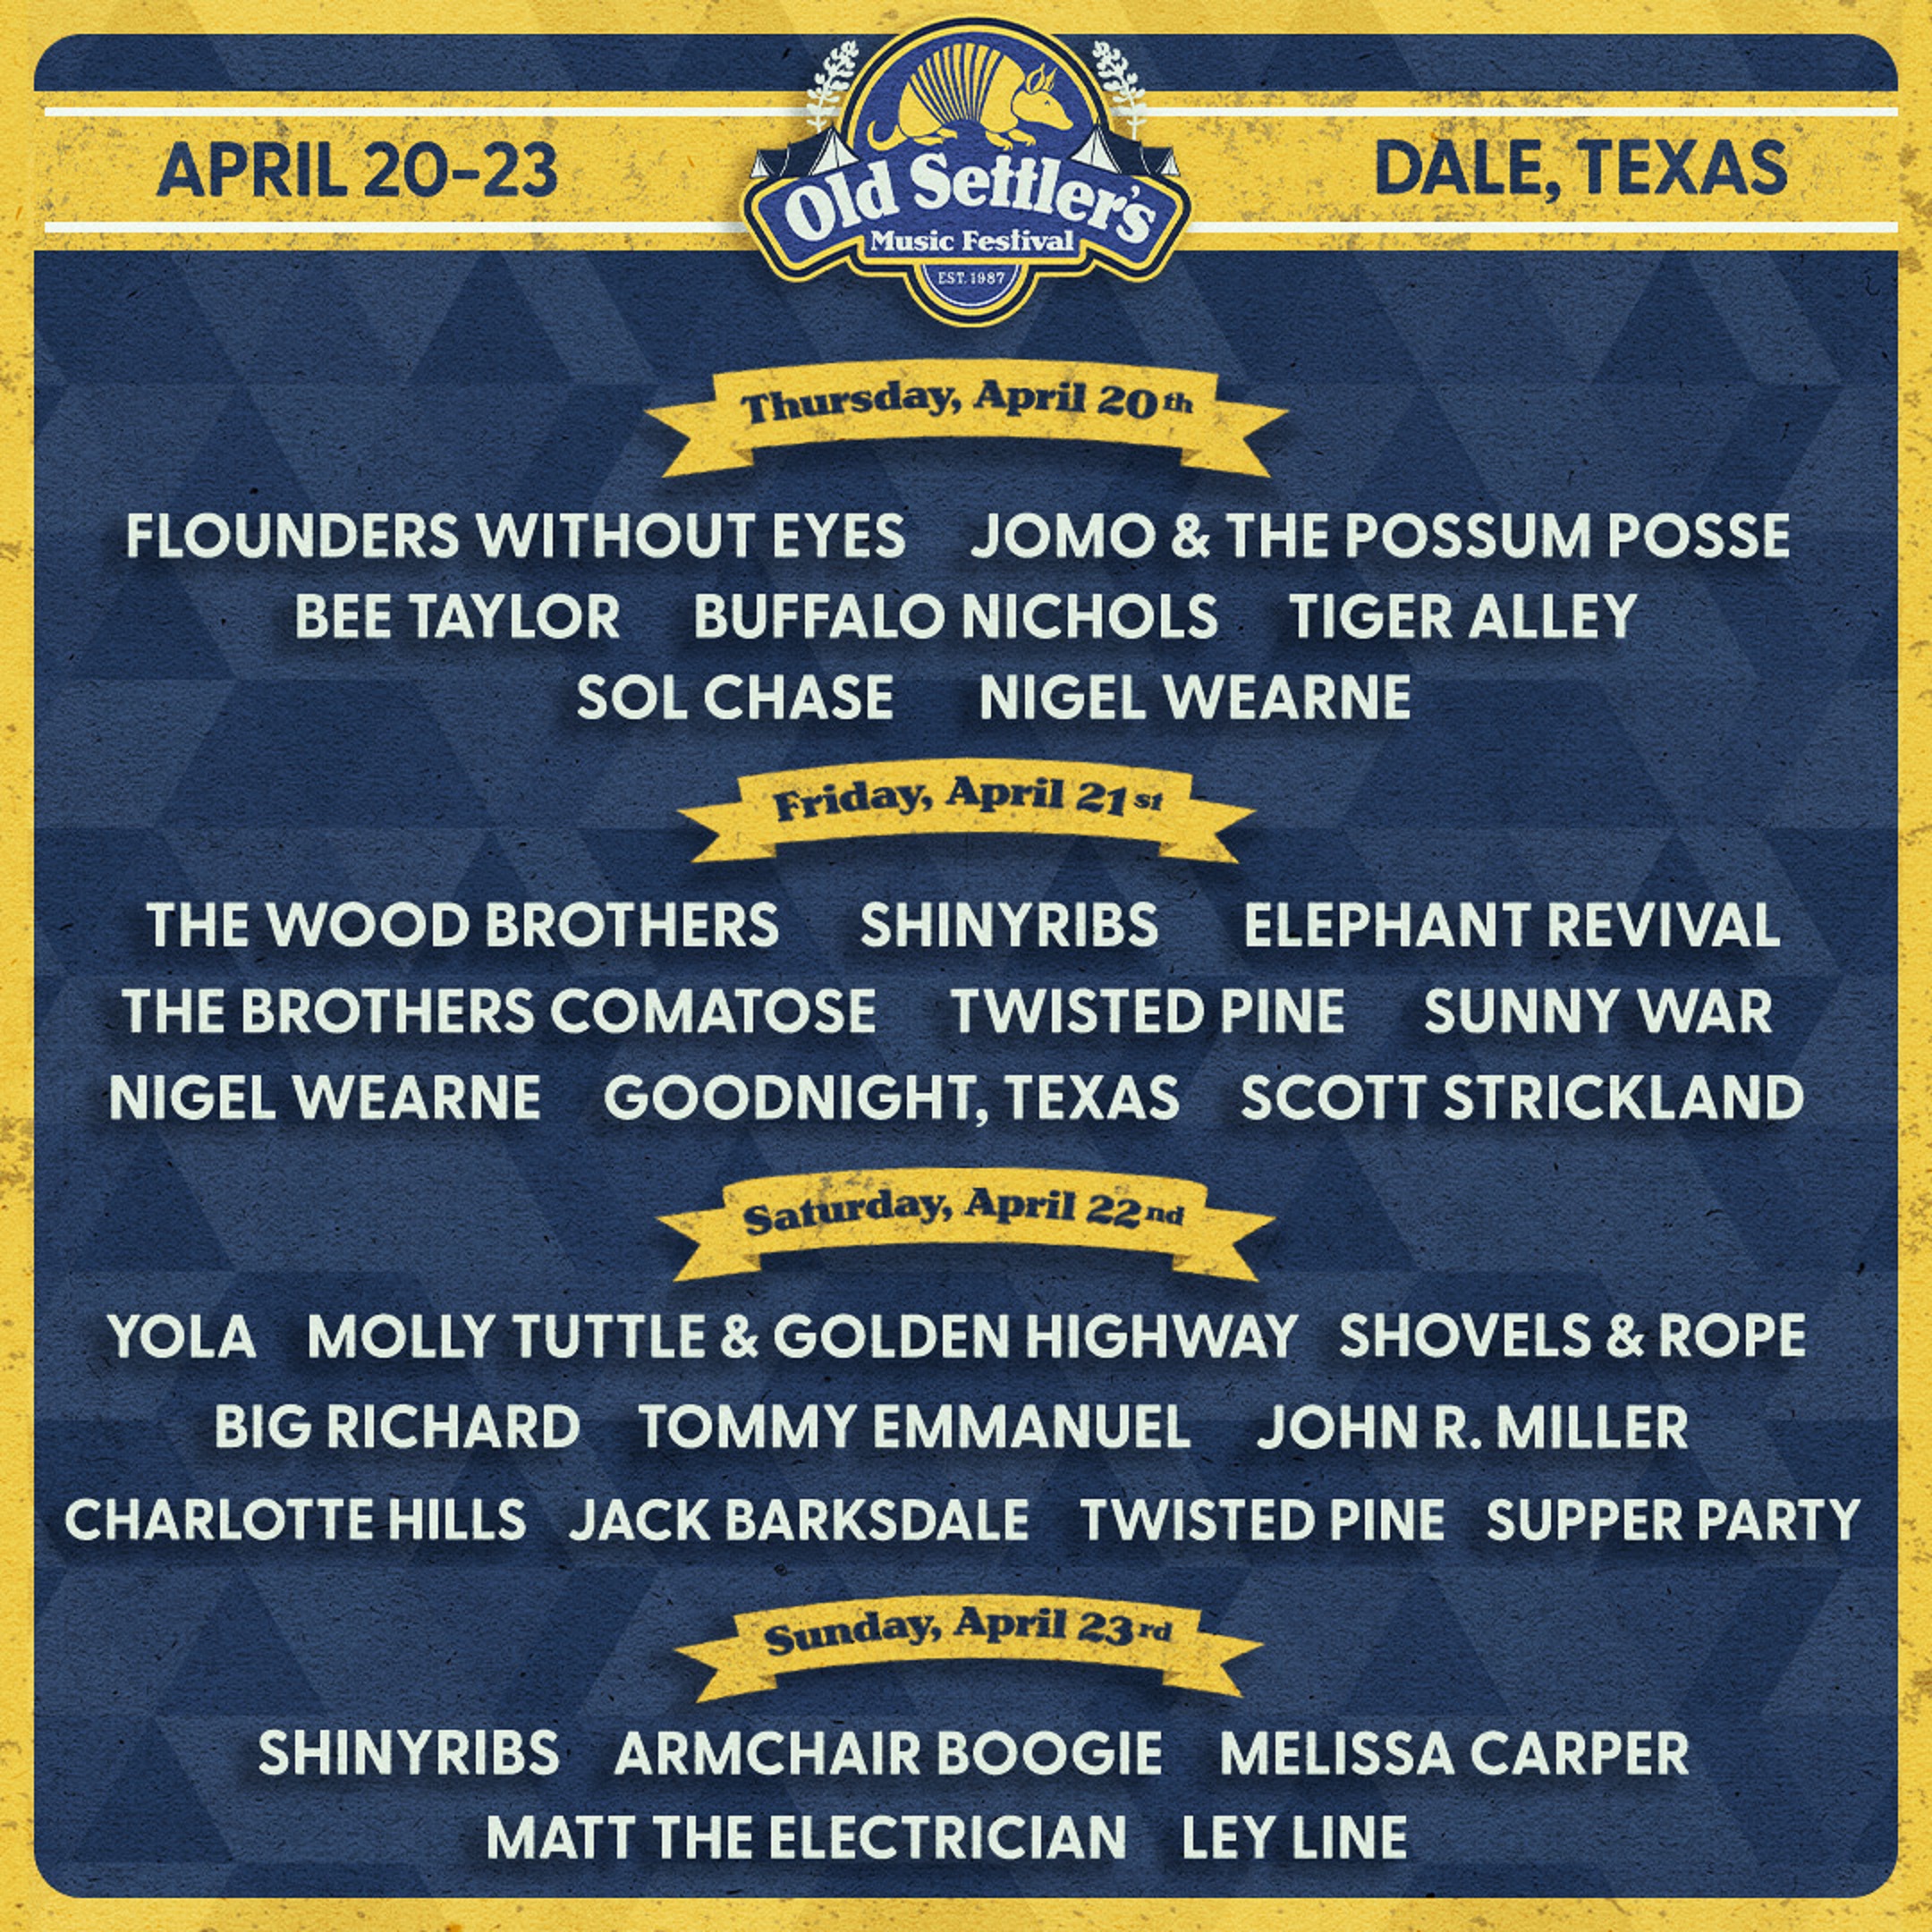 Old Settler's Music Festival announces phenomenal lineup and tickets on sale for 36th annual event, April 20-23